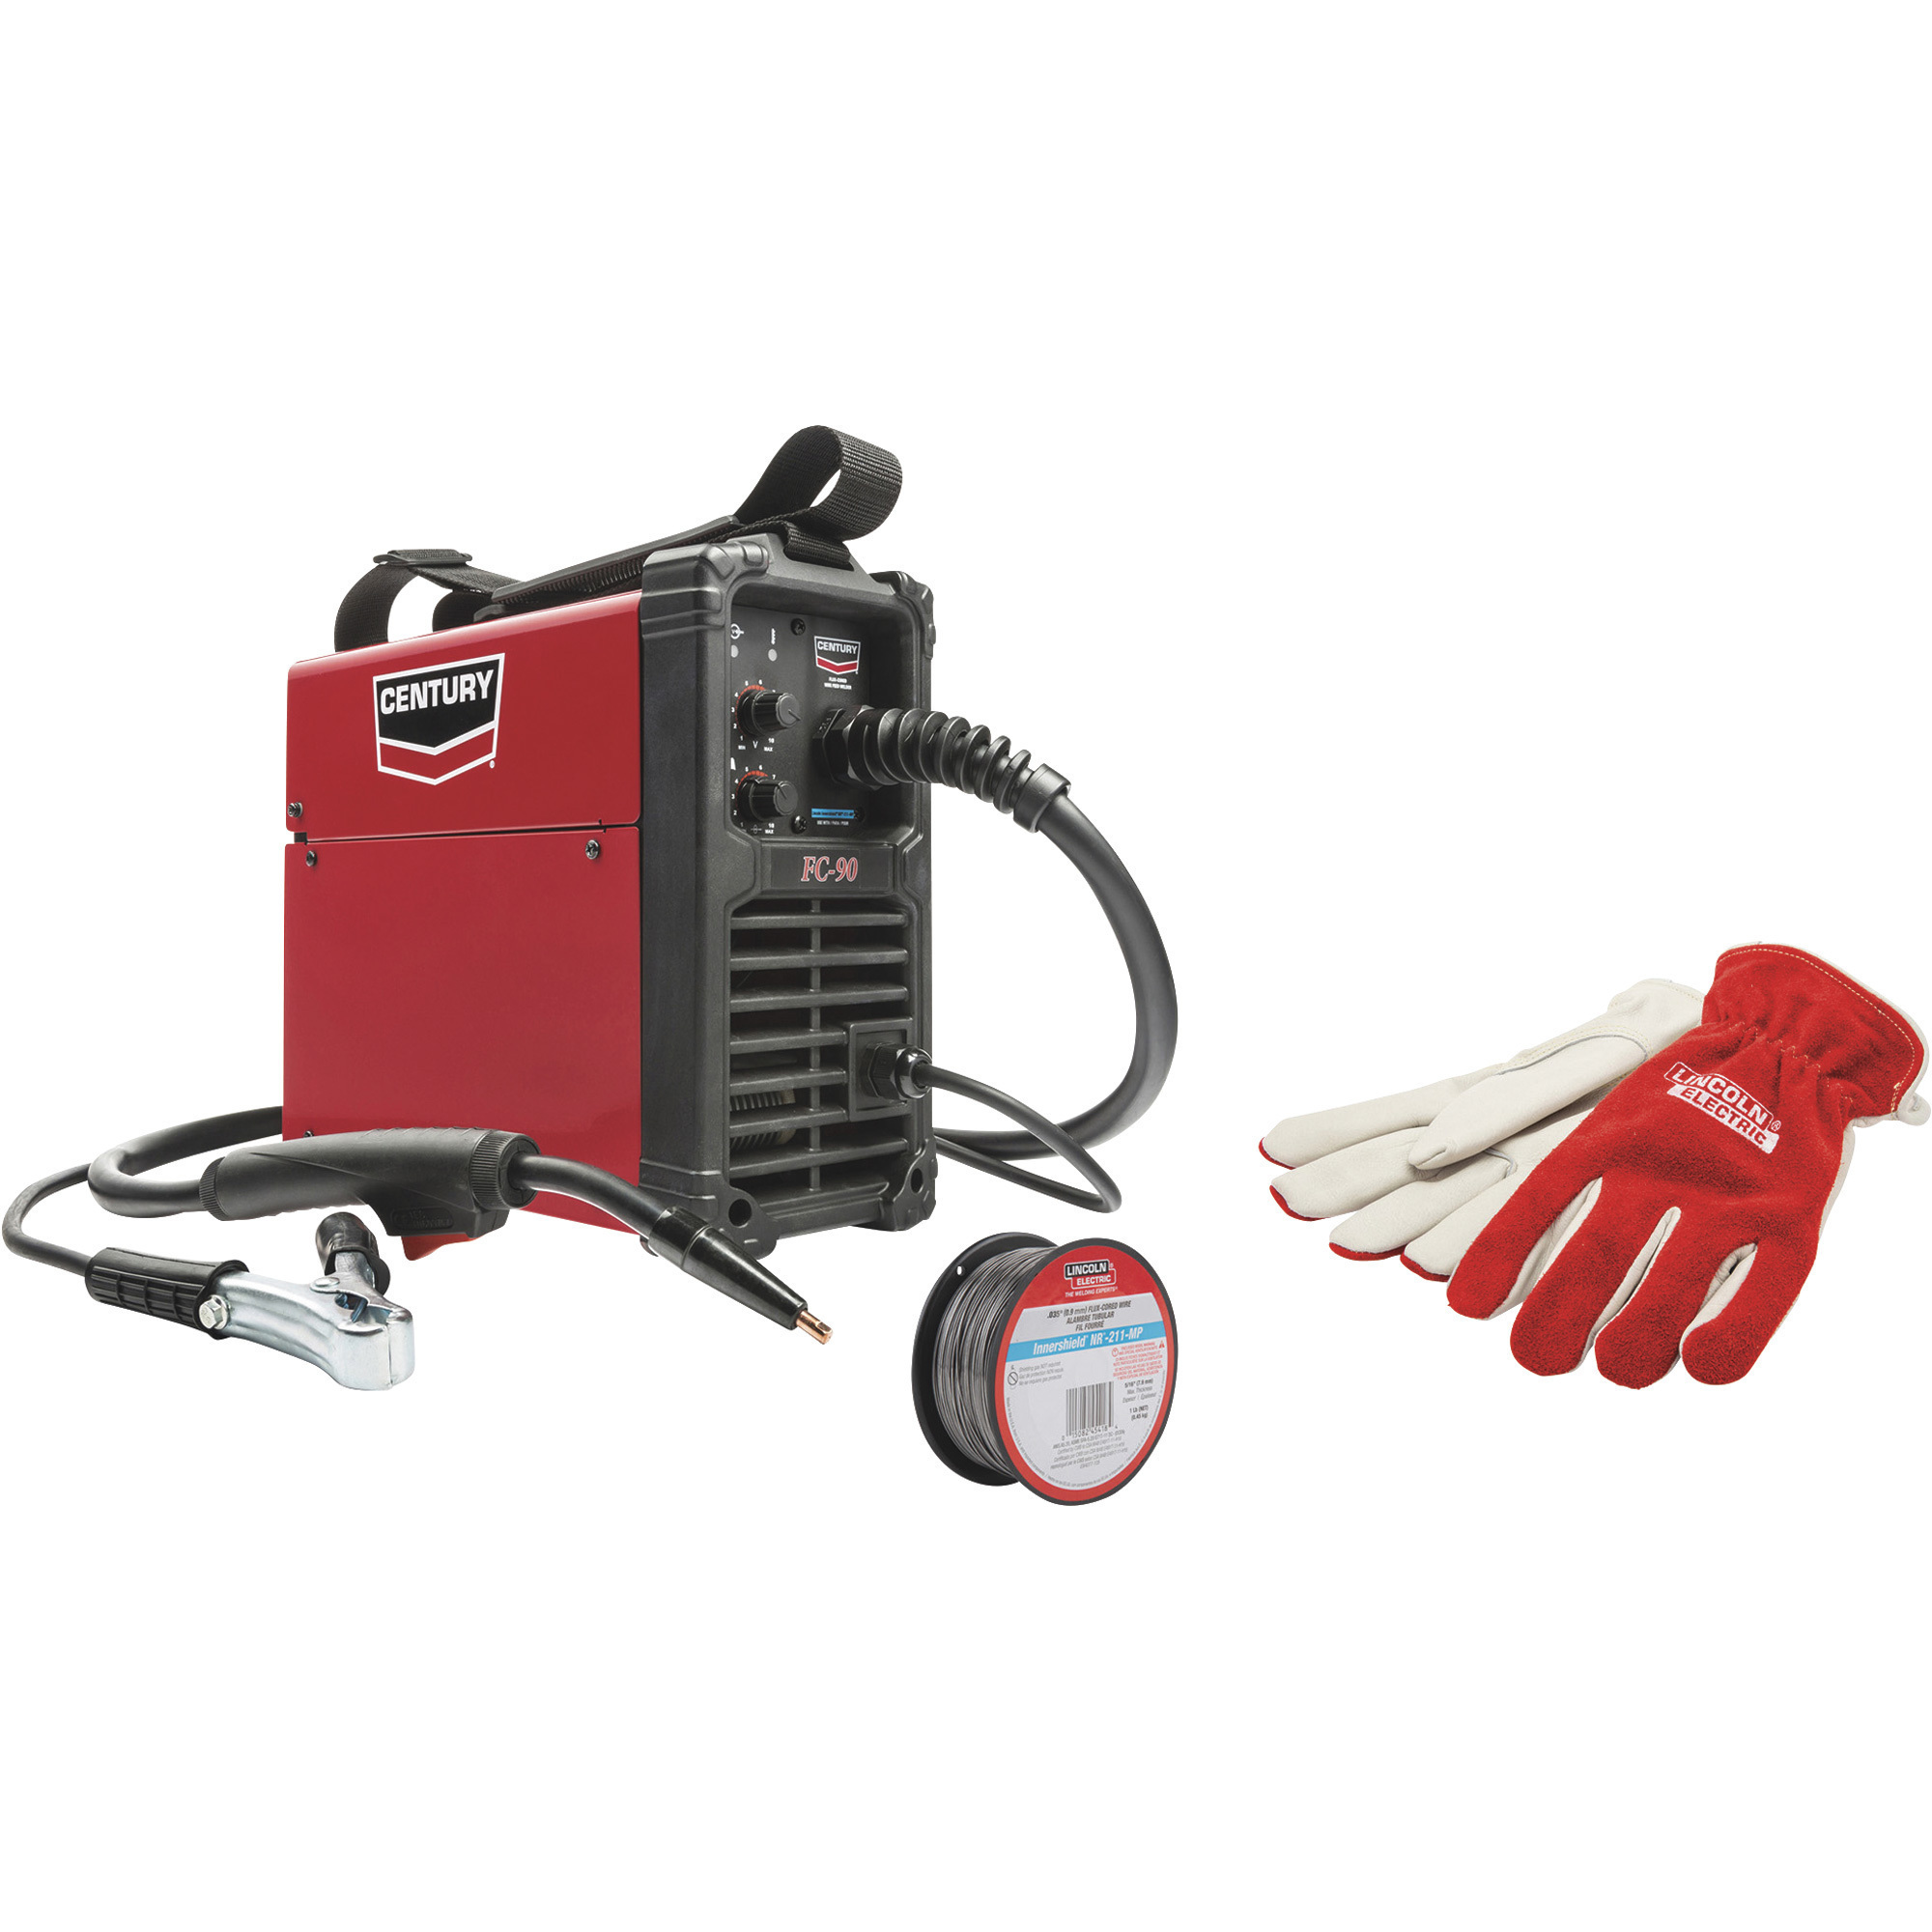 Lincoln Electric FC 90 Flux-Core Wire Feed Welder Kit, Includes XL